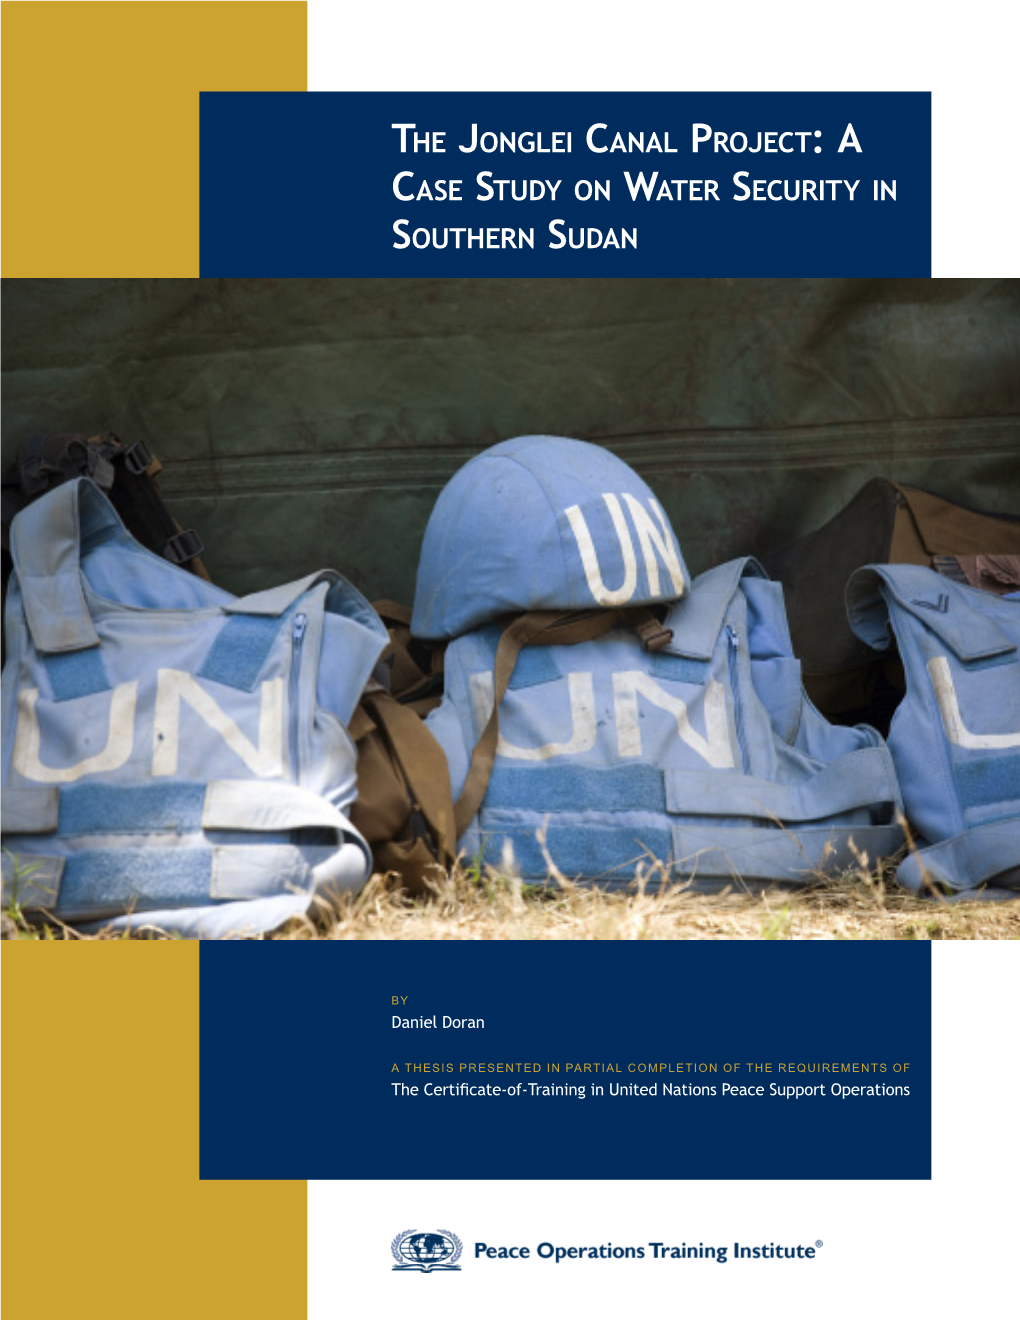 The Jonglei Canal Project: a Case Study on Water Security in Southern Sudan